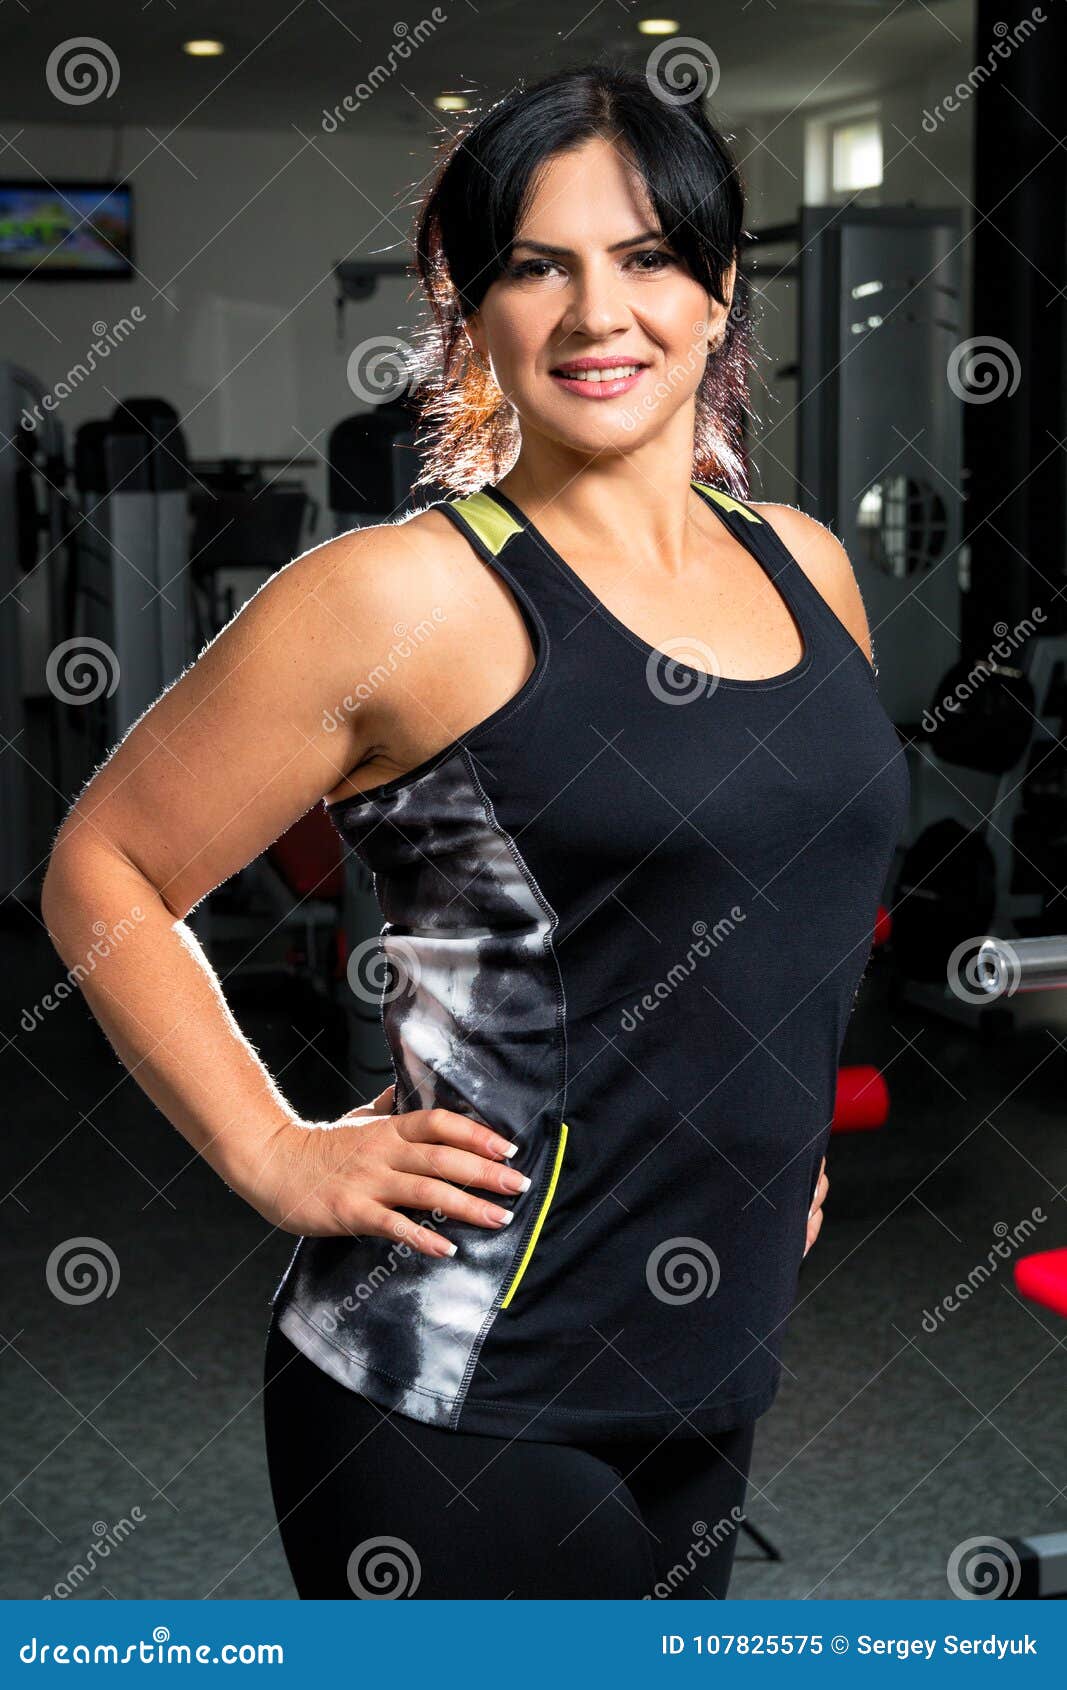 https://thumbs.dreamstime.com/z/woman-plus-size-gym-posing-happy-female-xxl-losing-weight-f-fat-model-working-her-body-fitness-hall-healthy-lifestyle-107825575.jpg